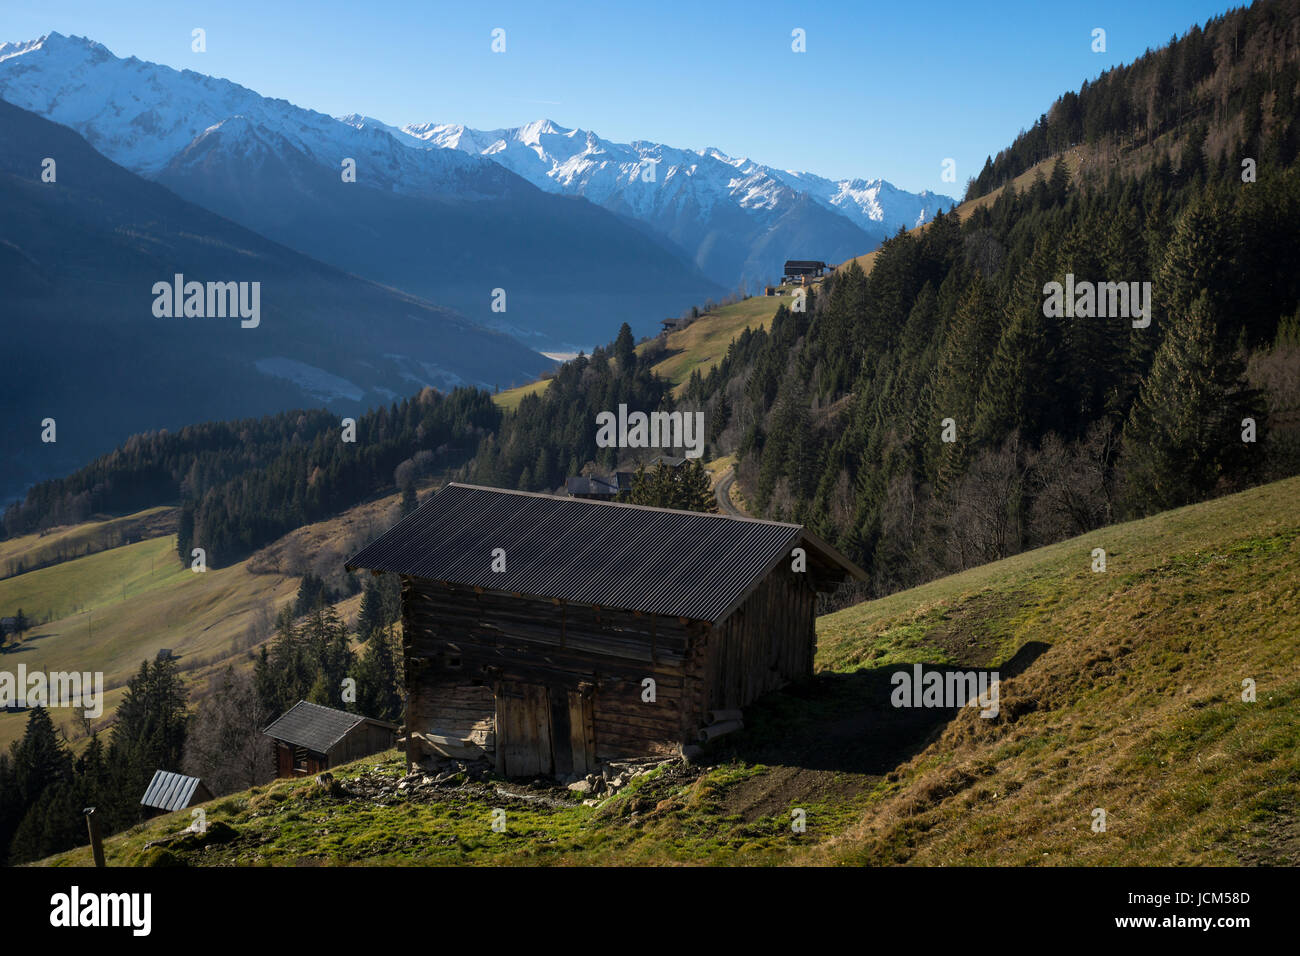 Hut on green gras with a view on the snowy mountains, Tirol Austria, Pass Thurn Stock Photo